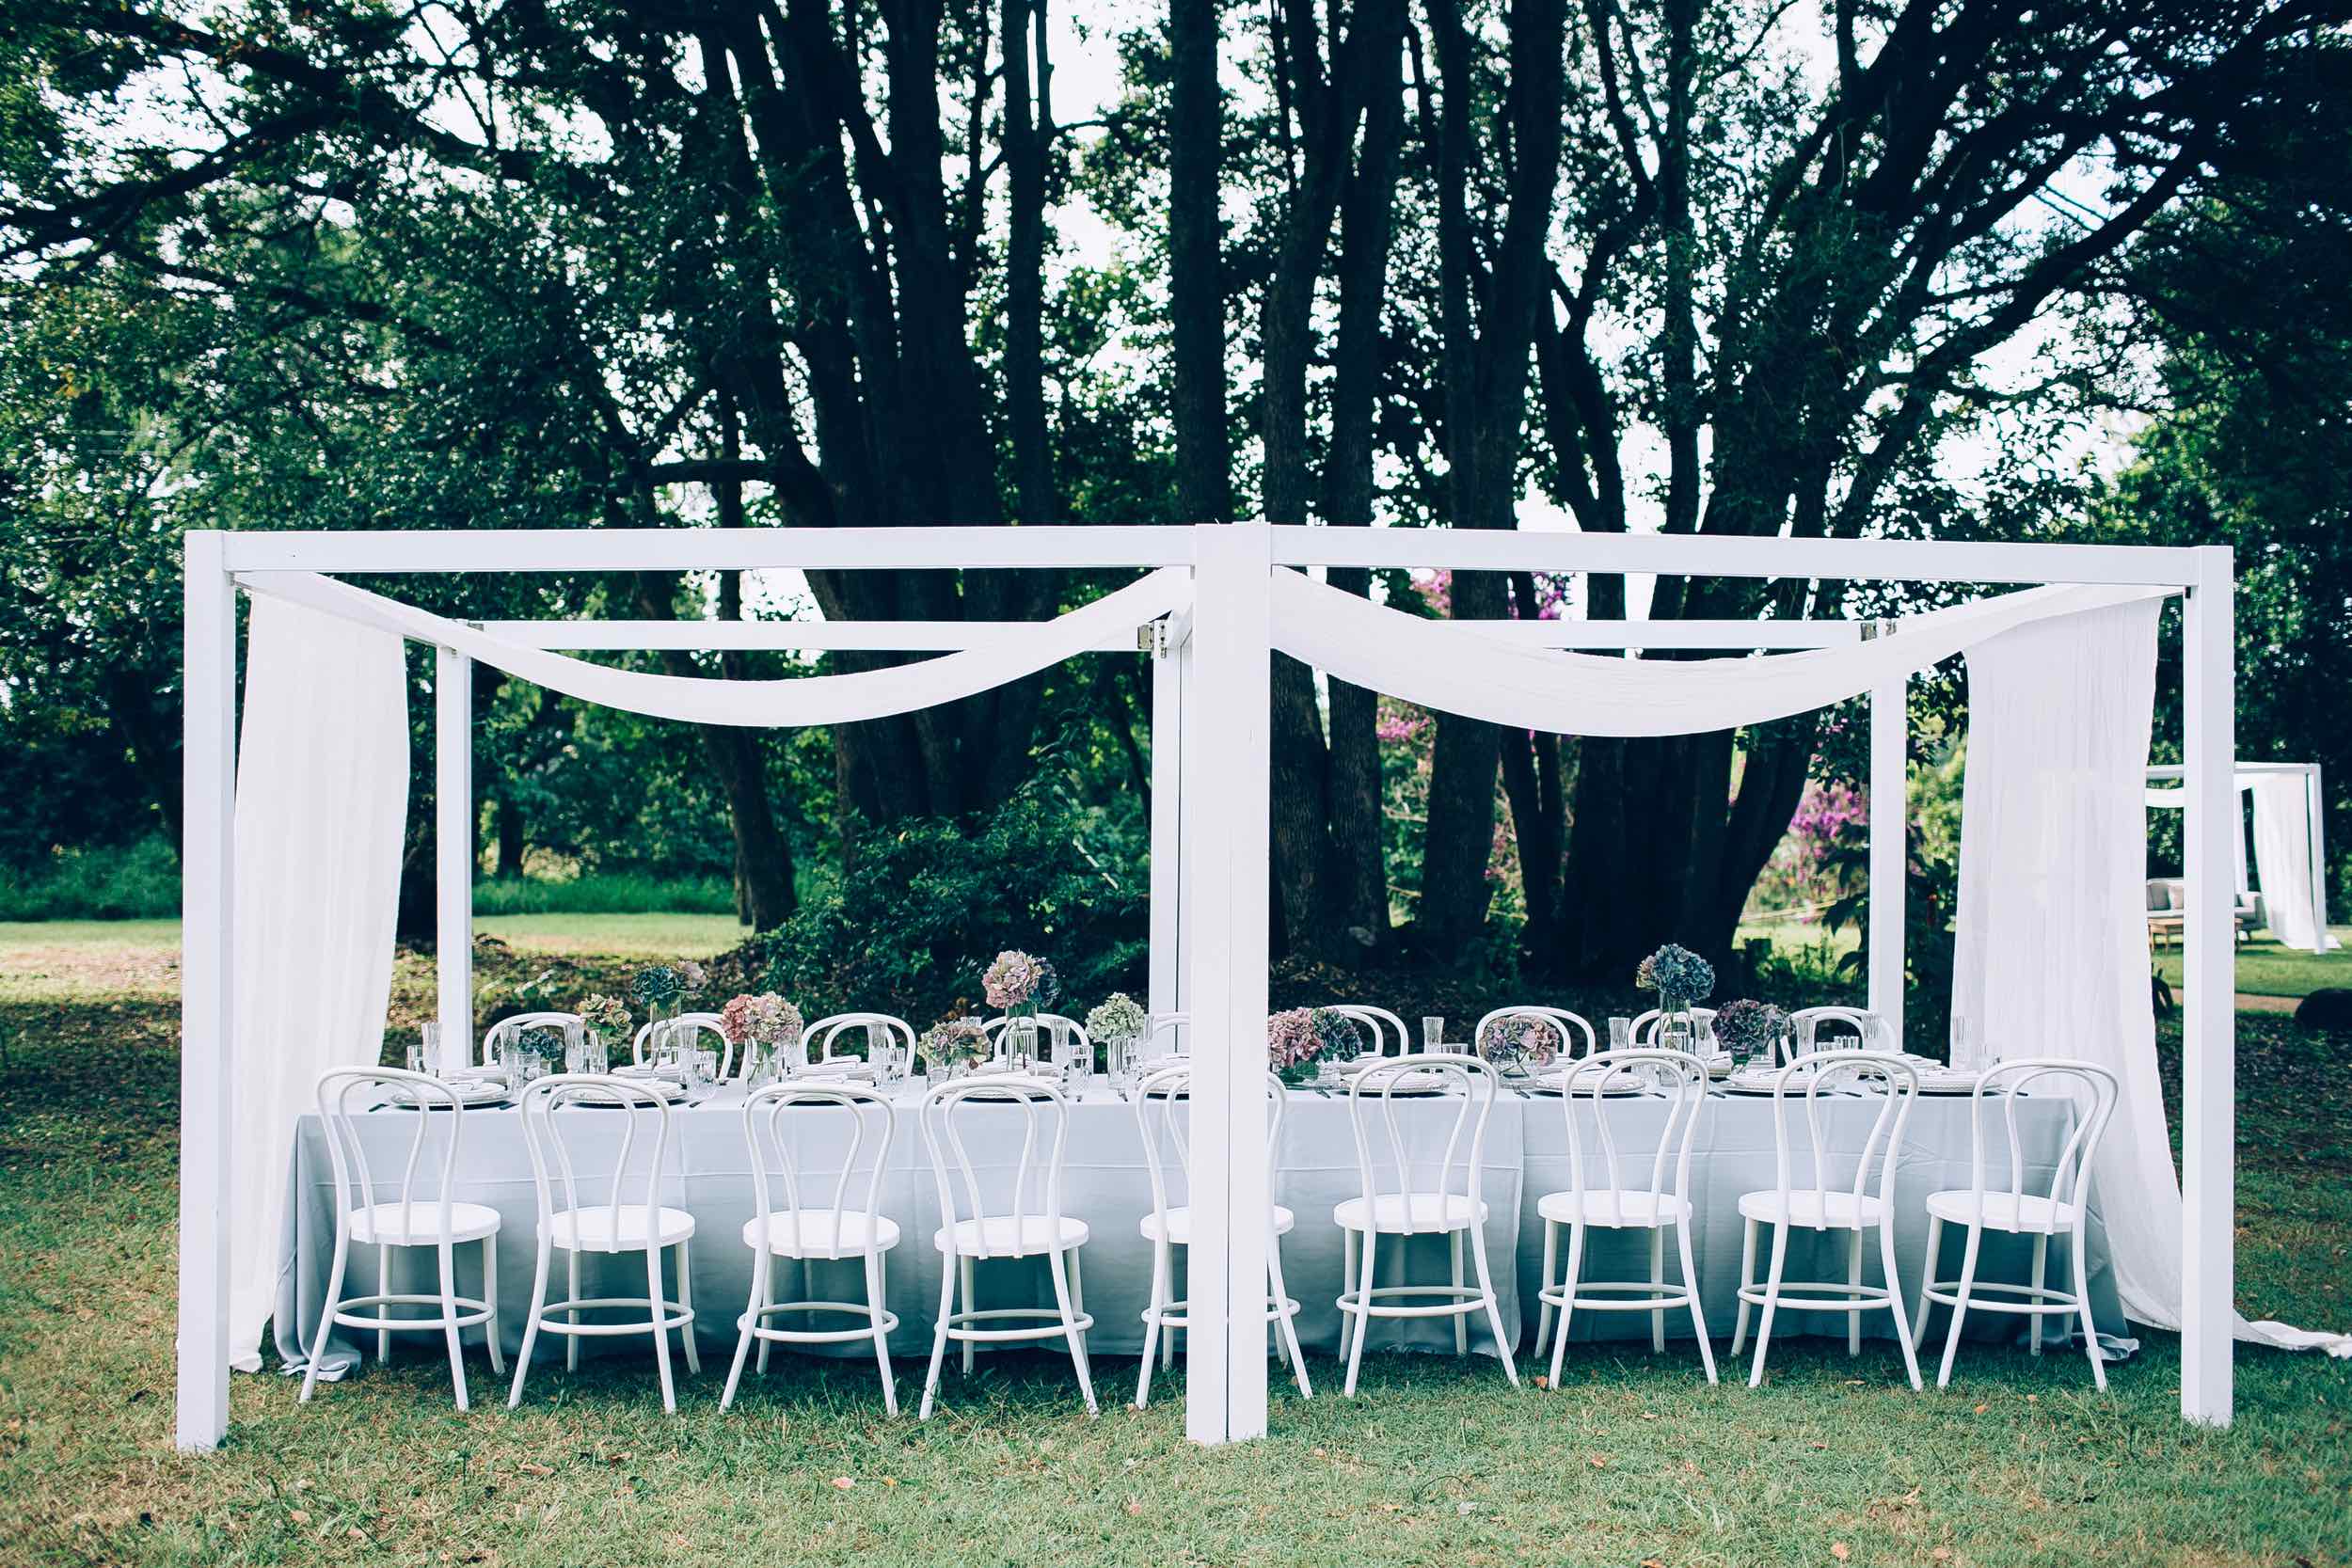 hiring-tables-and-chairs-for-wedding.jpg